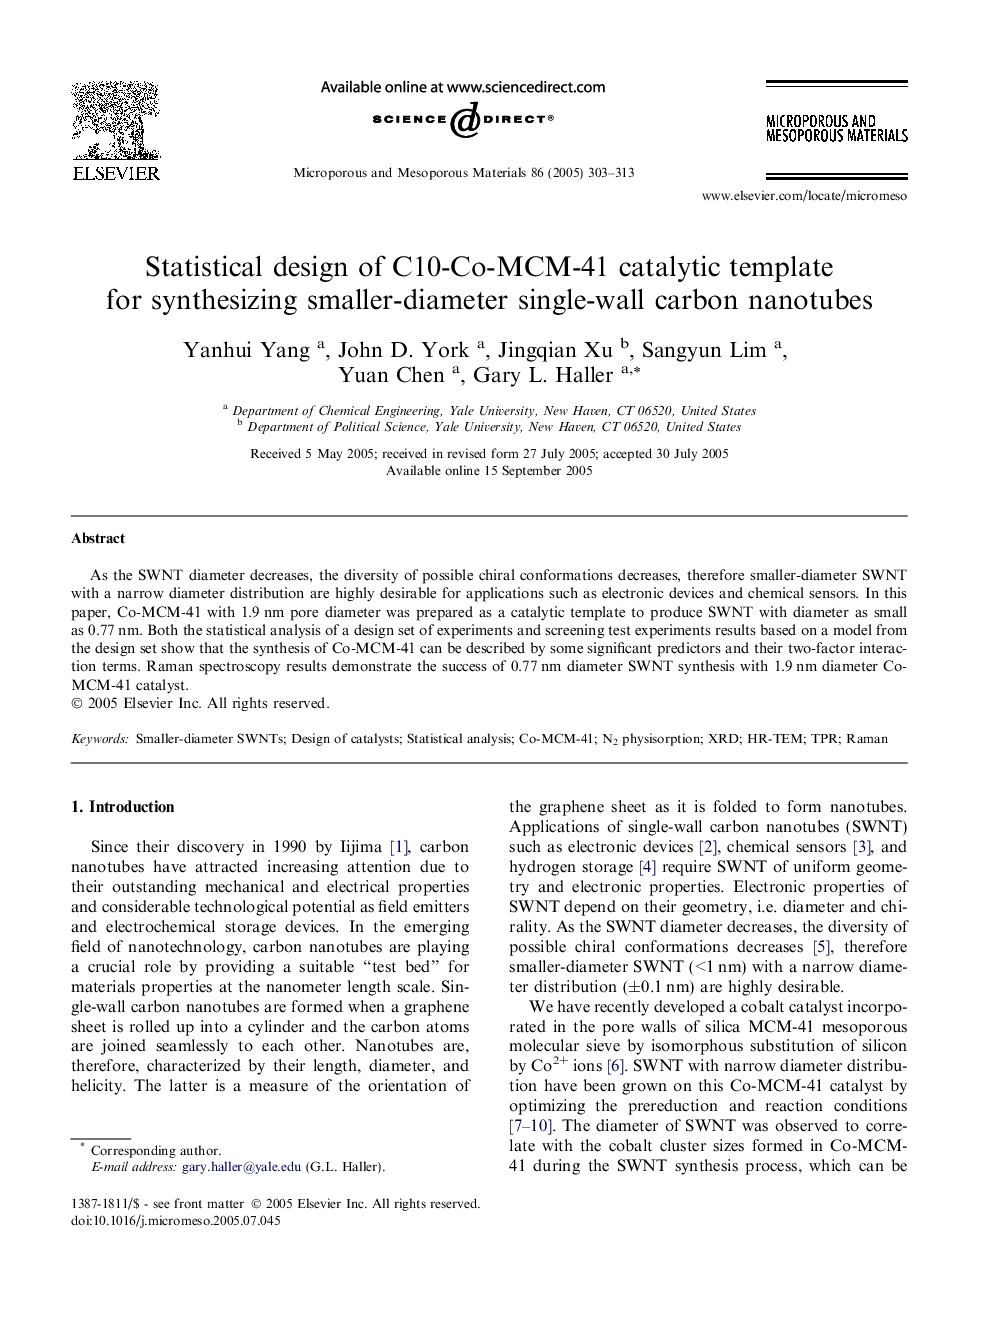 Statistical design of C10-Co-MCM-41 catalytic template for synthesizing smaller-diameter single-wall carbon nanotubes